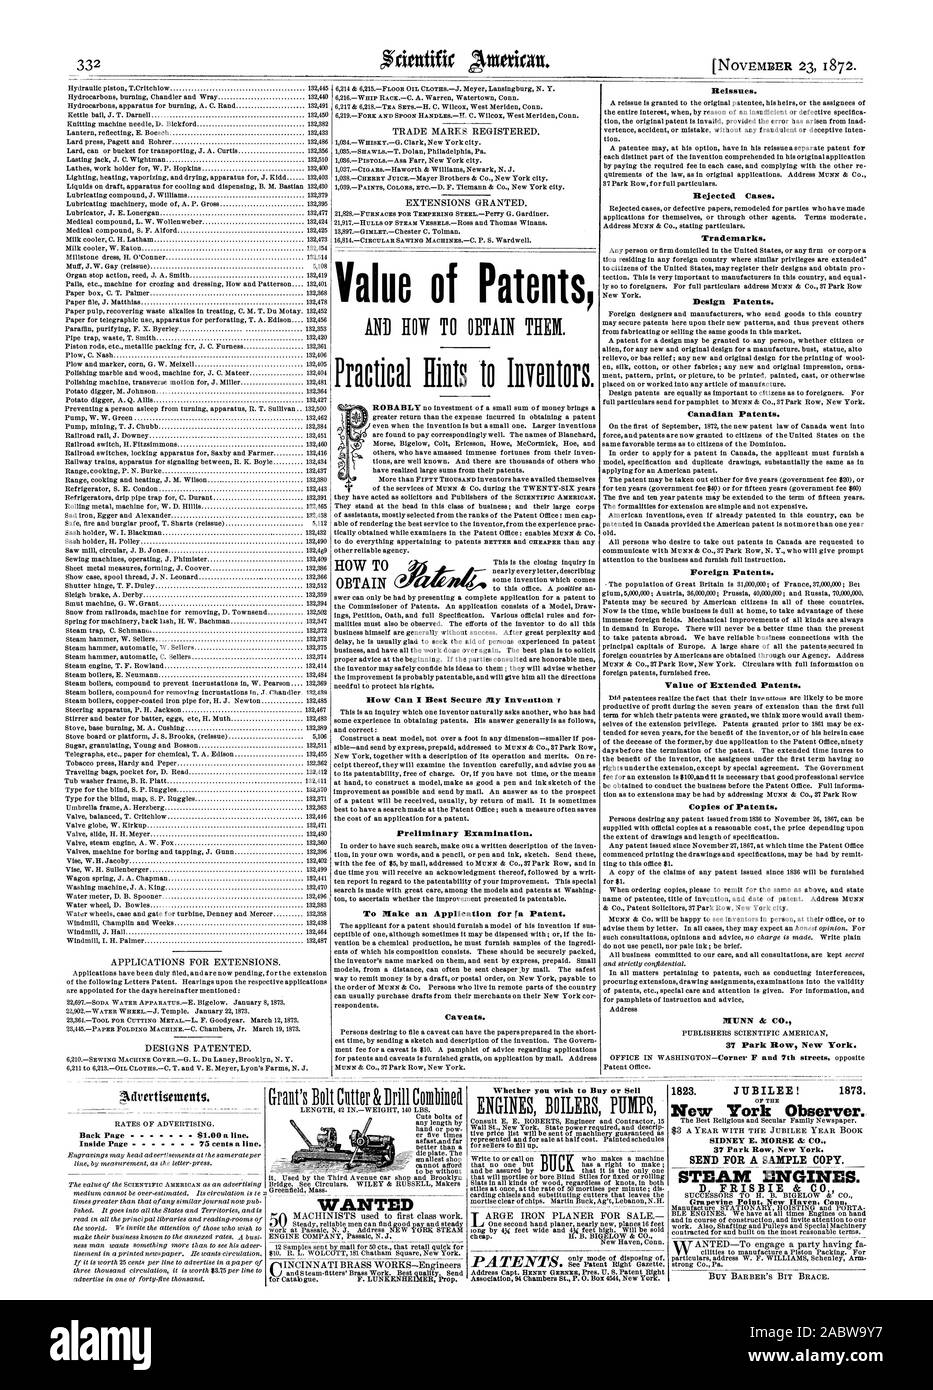 Value of Patents How Can I Best Secure My Invention 's Preliminary Examination. To Make an Application for ra Patent. Caveats. HOW TO ' OBTAIN Reissues. Rejected Cases. Trademarks. Design Patents. Canadian Patents. Foreign Patents. Value of Extended Patents. Copies of Patents. 37 Park Row New York. Back Page  $1.00 a line. Inside Page  75 cents a line. WANTED Whether you wish to Buy or Sell 1823. JUBILEE! 1873. New York Observer. SIDNEY E. MORSE clic CO. SEND FOR A SAMPLE COPY. STEAM ENGINES. D. FRISBIE & CO. Grapevine Point New Haven Conn, scientific american, 1872-11-23 Stock Photo